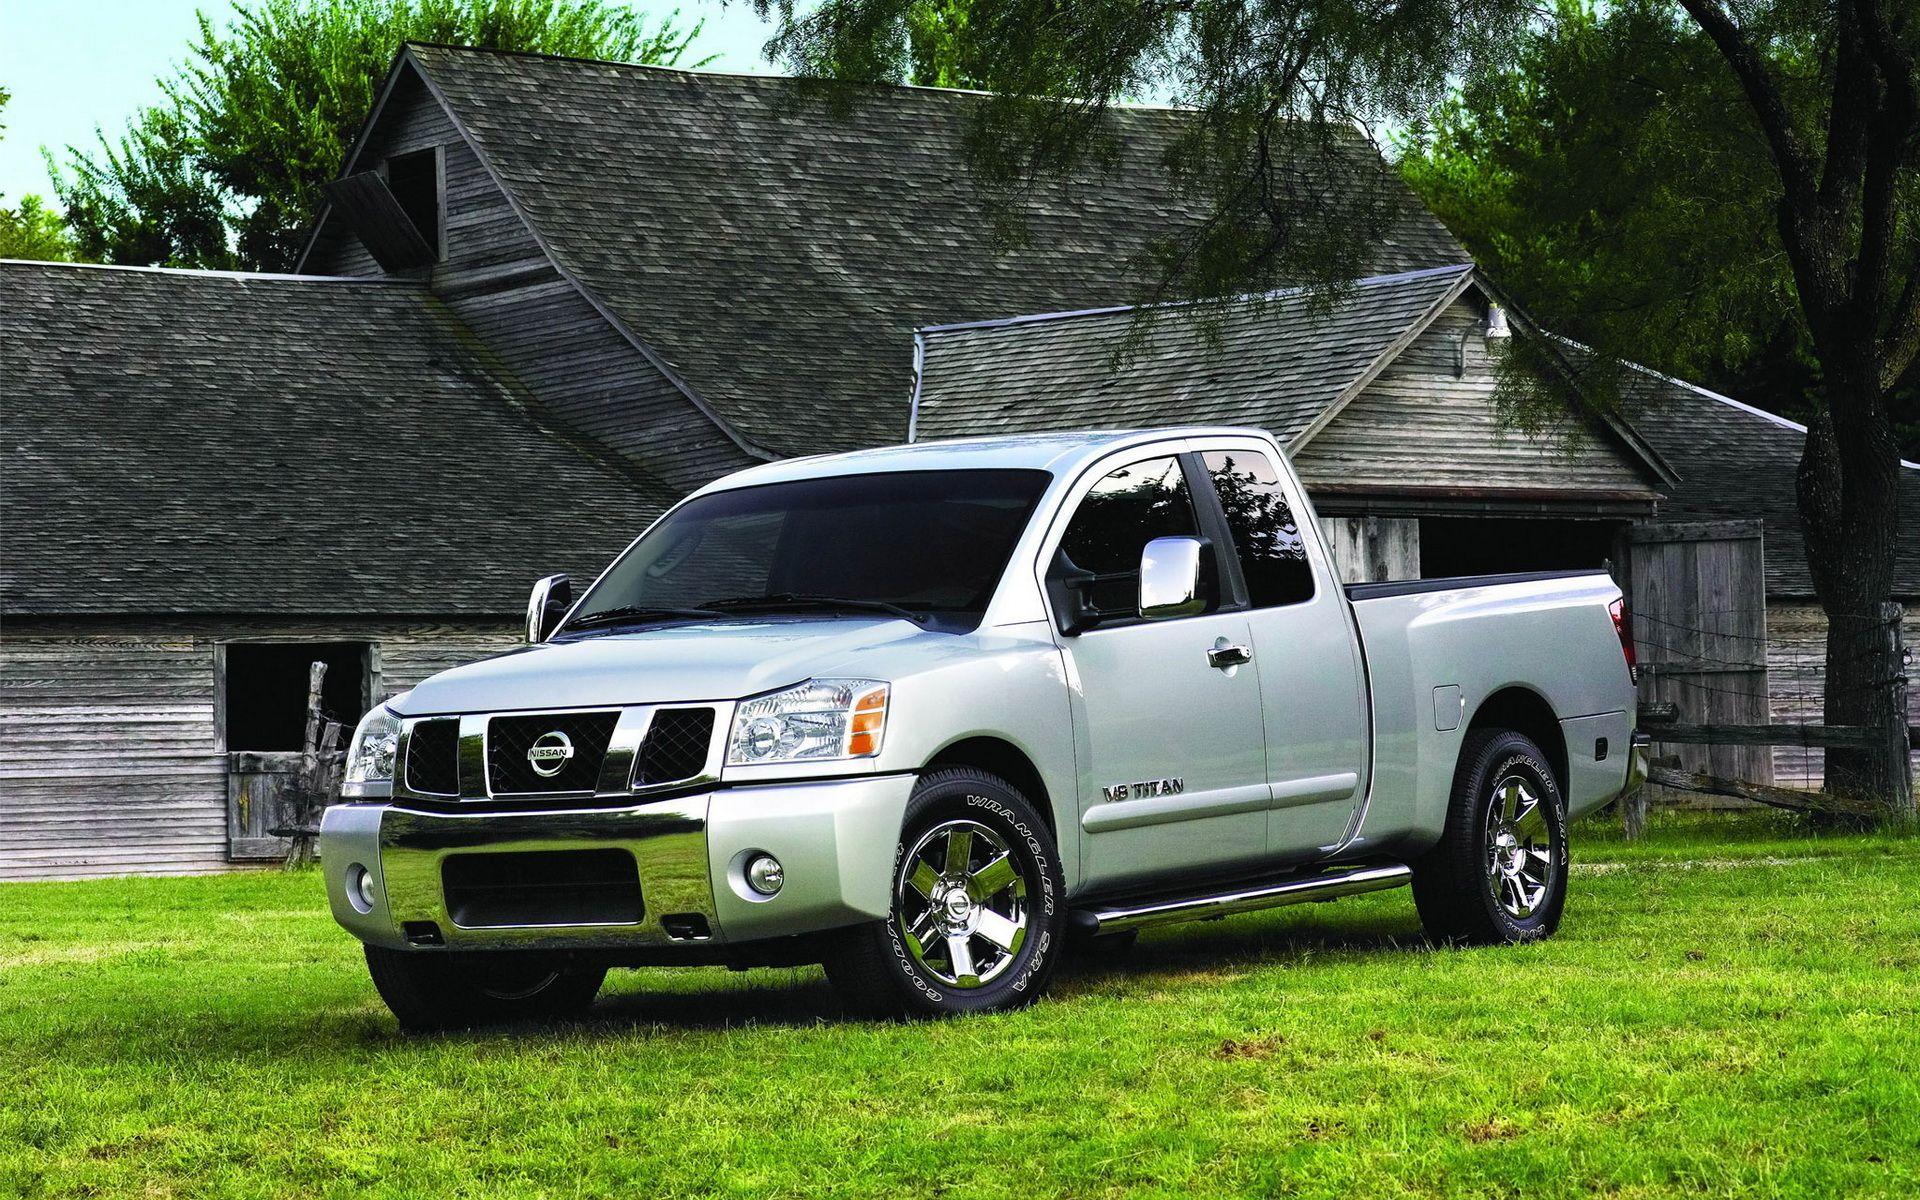 Nissan Titan V8 wallpaper and image, picture, photo